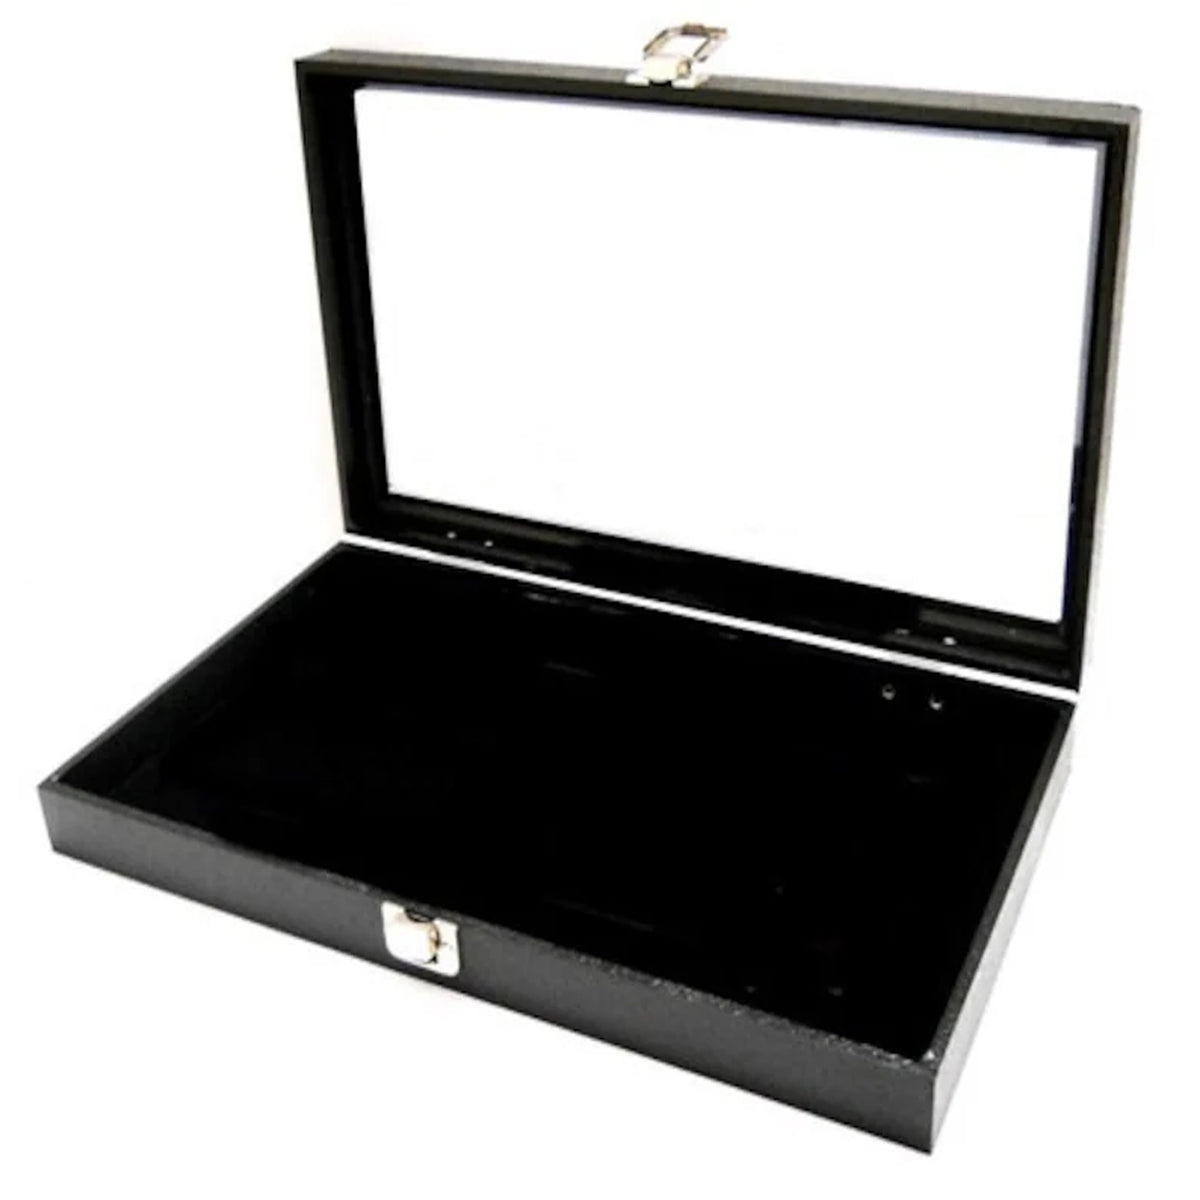 Wholesale Enclosed Glass Covered Jewelry Presentation Box Ring Tray With Pad (Sold by the piece)